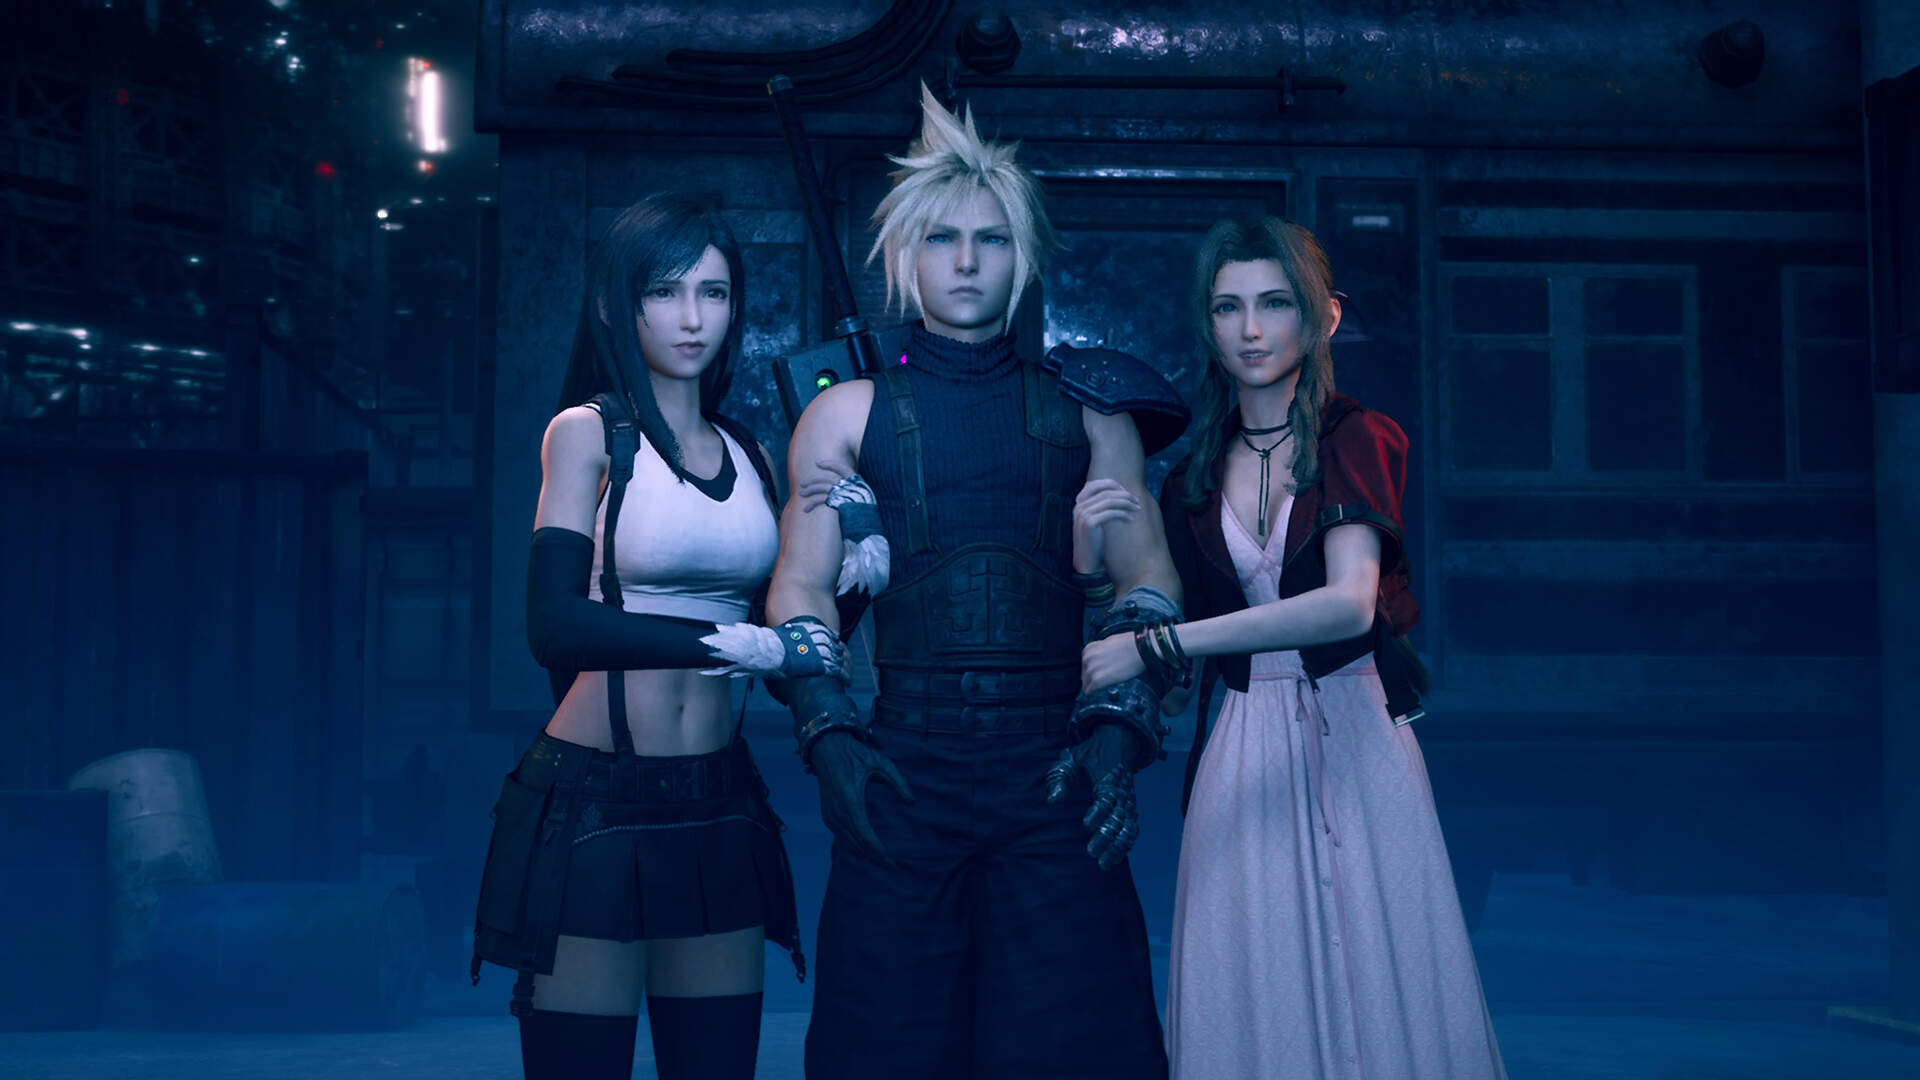 Starting screen for Final Fantasy VII with Cloud Aerith and Tifa